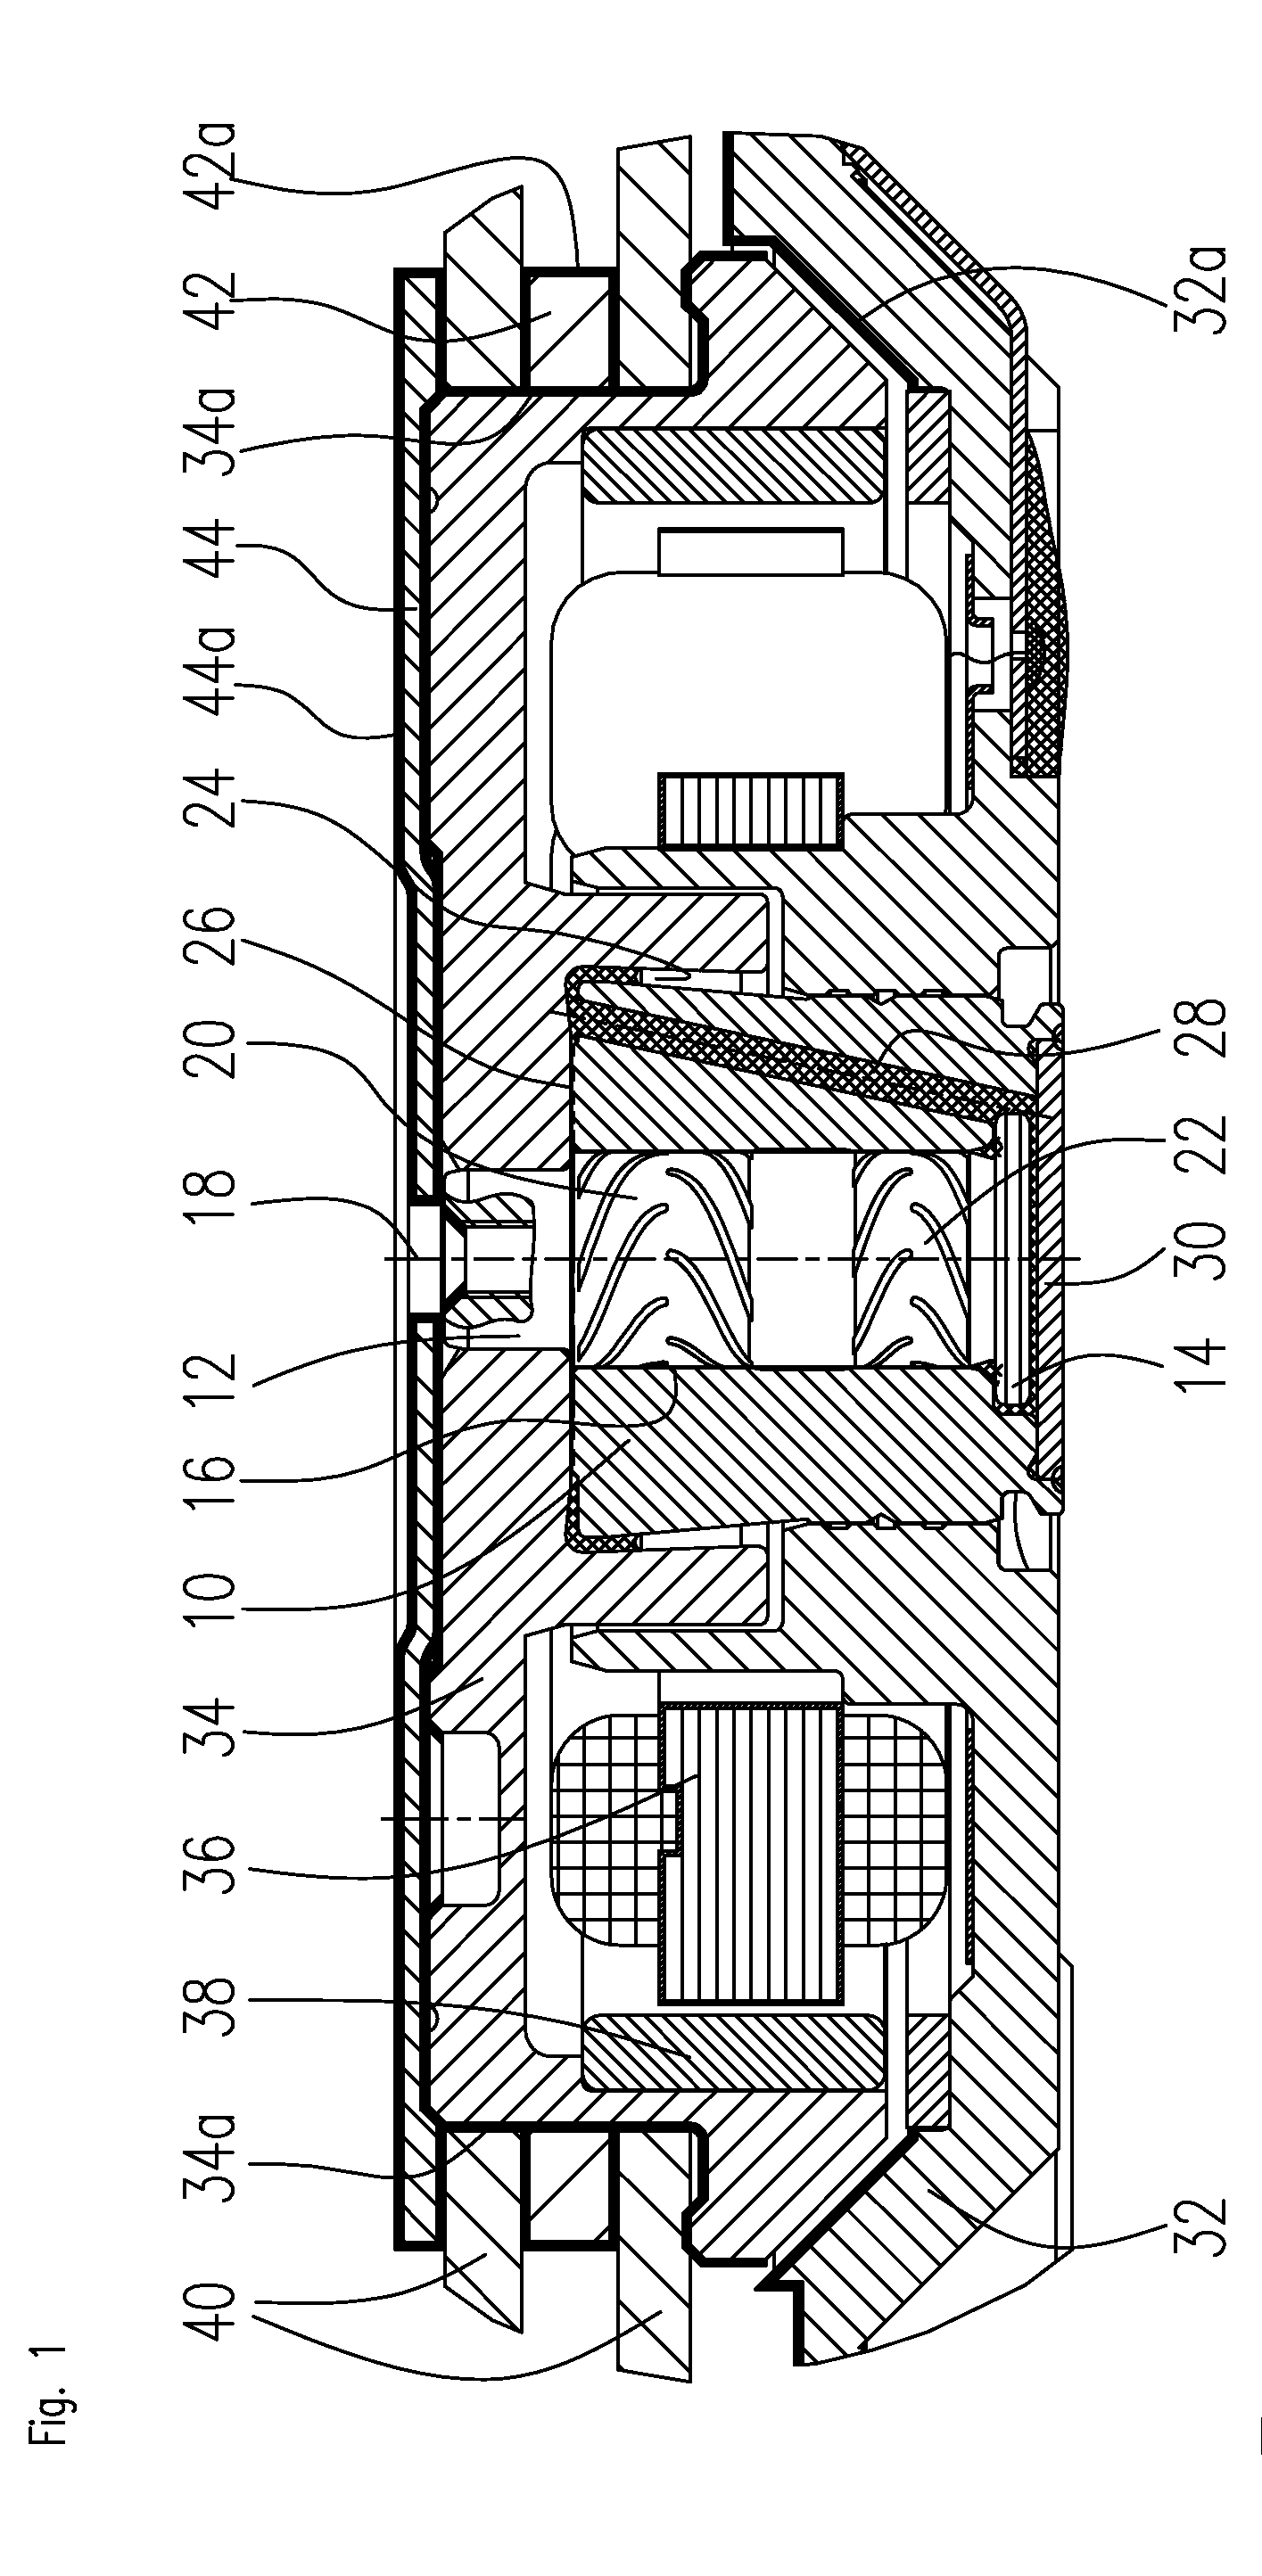 Spindle motor for driving a hard disk drive